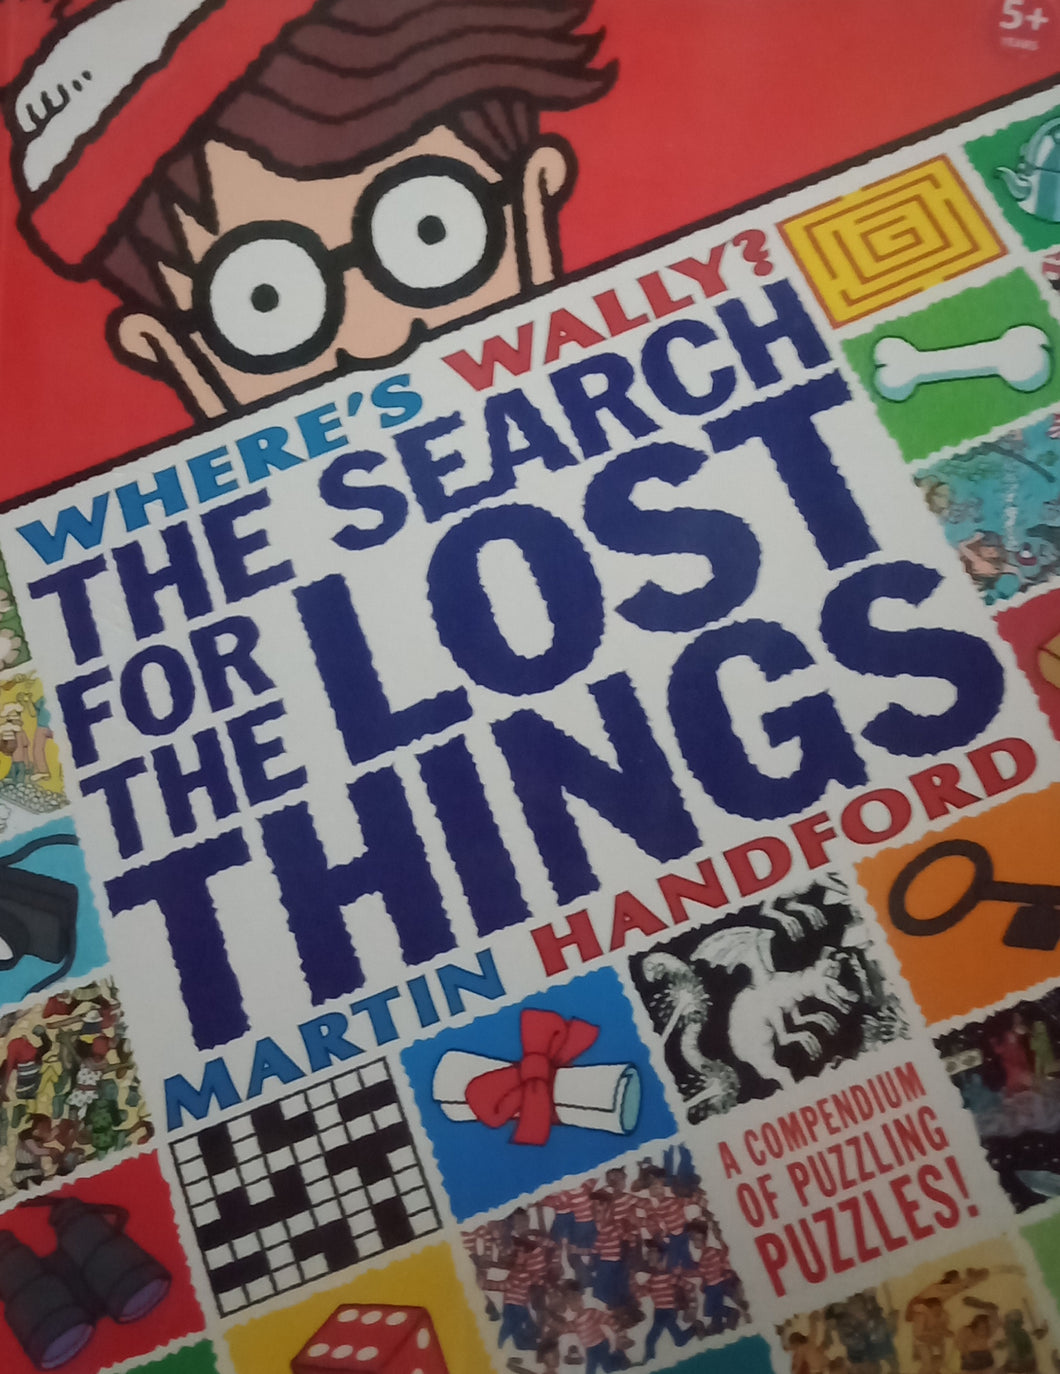 Where's Wally? The Search For The Lost Things by Martin Handford